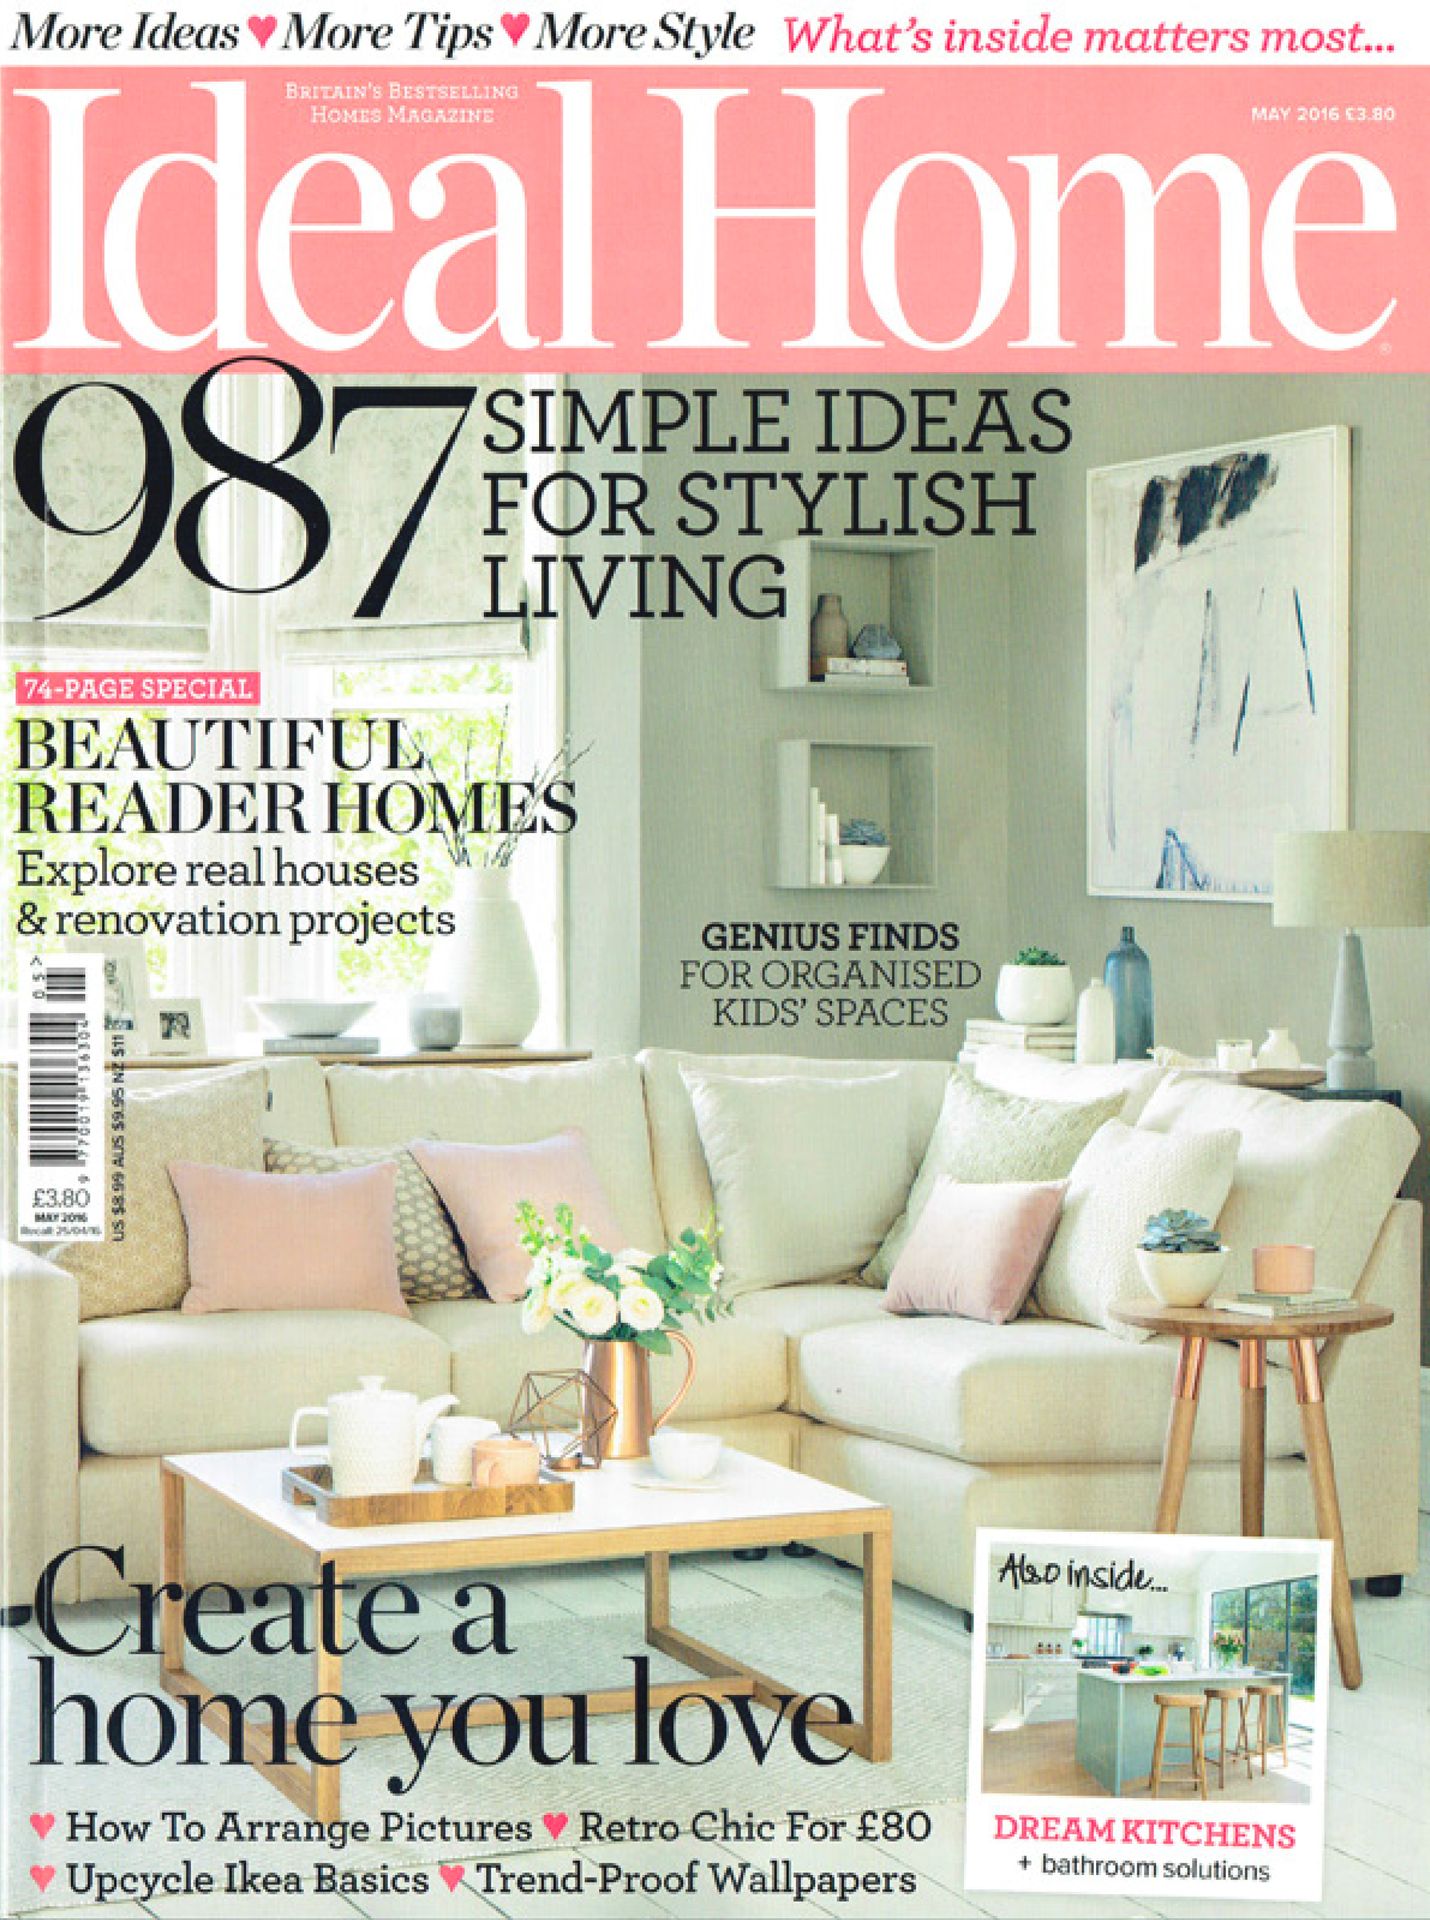 Build Team Featured in Ideal Home